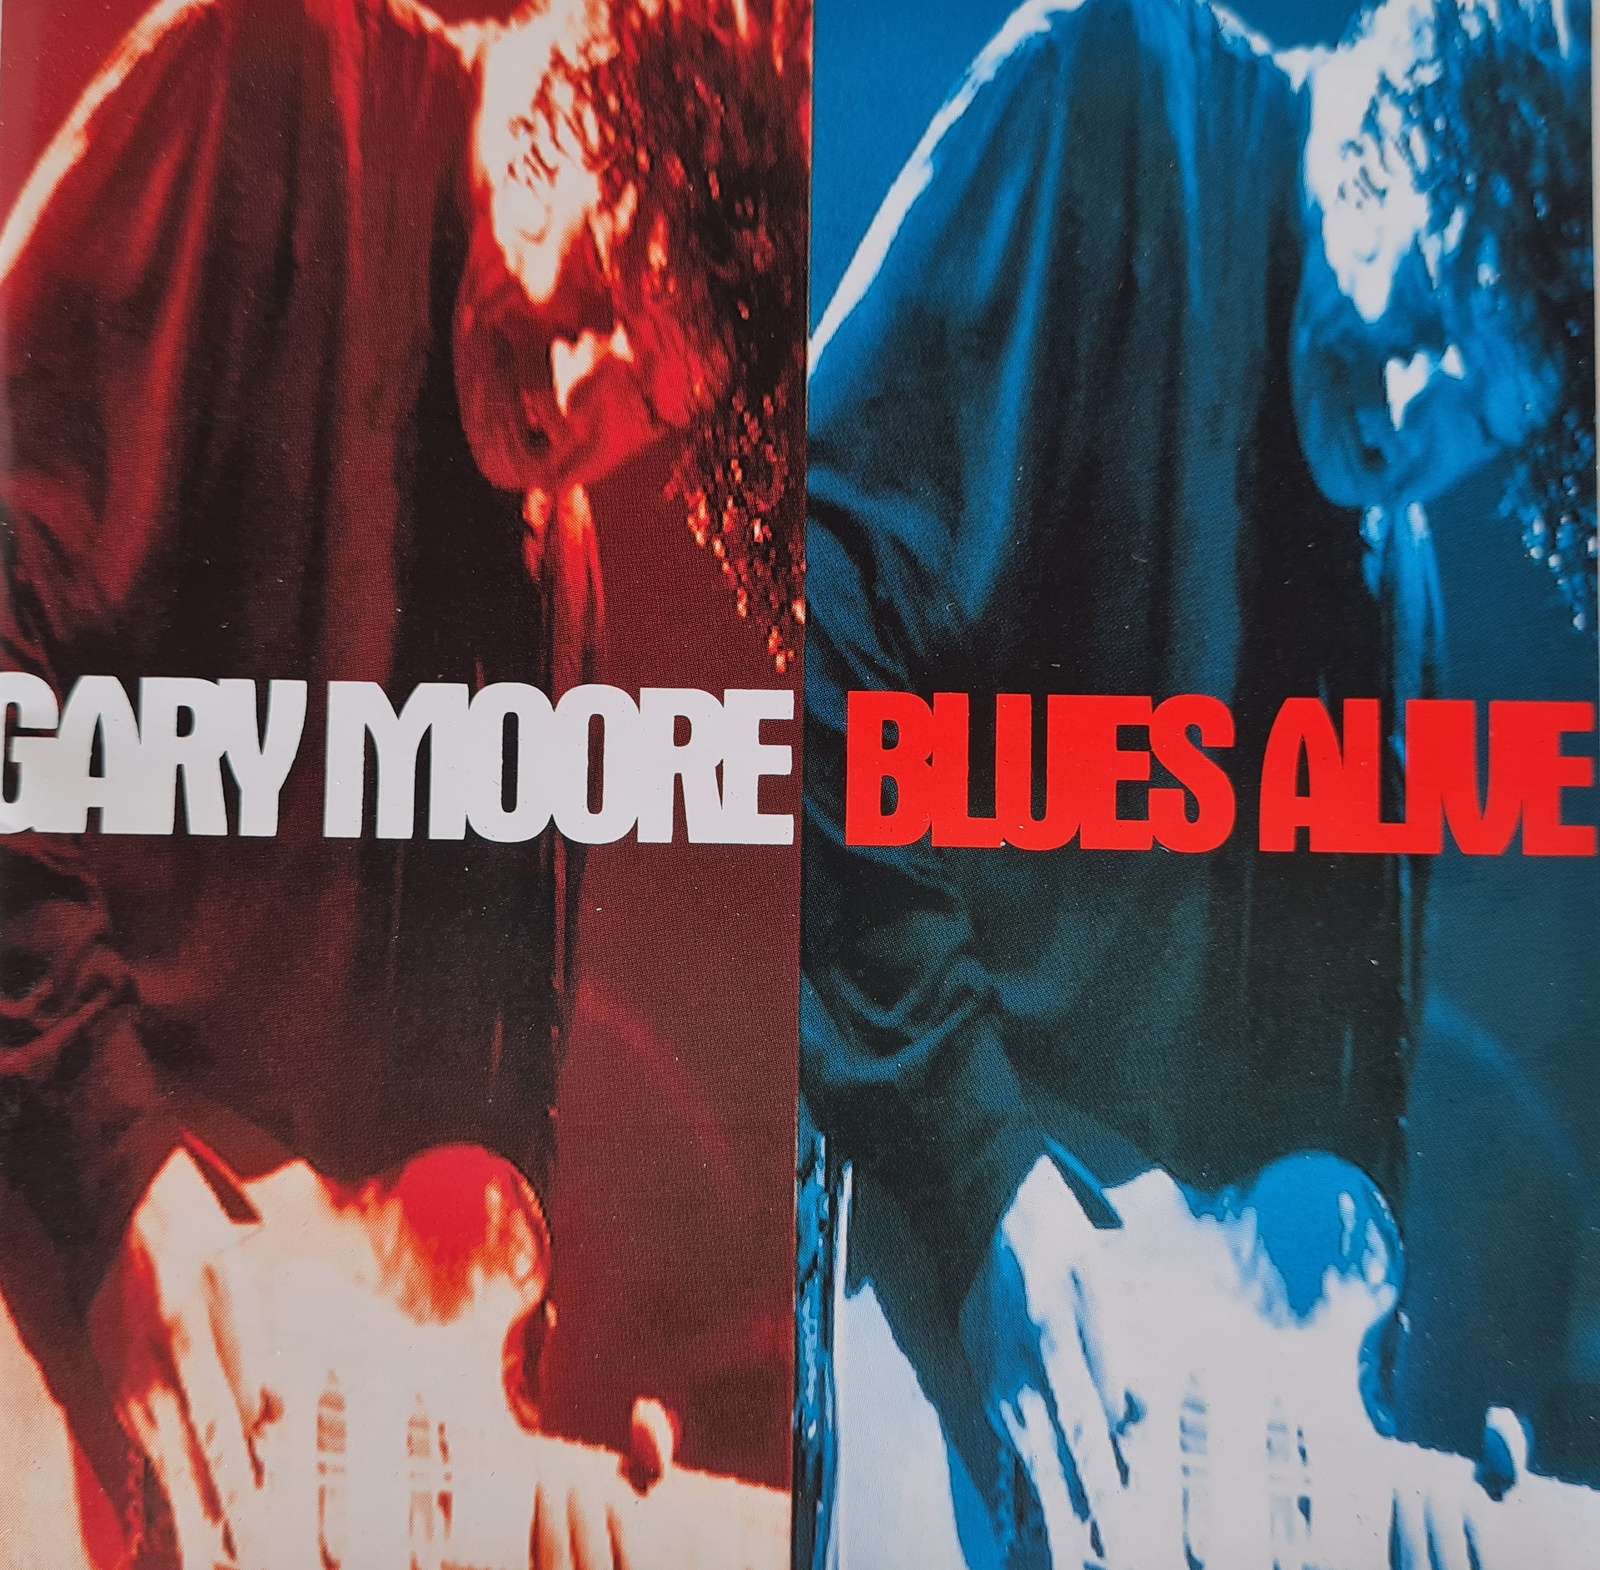 Gary Moore - Blues Alive (CD)